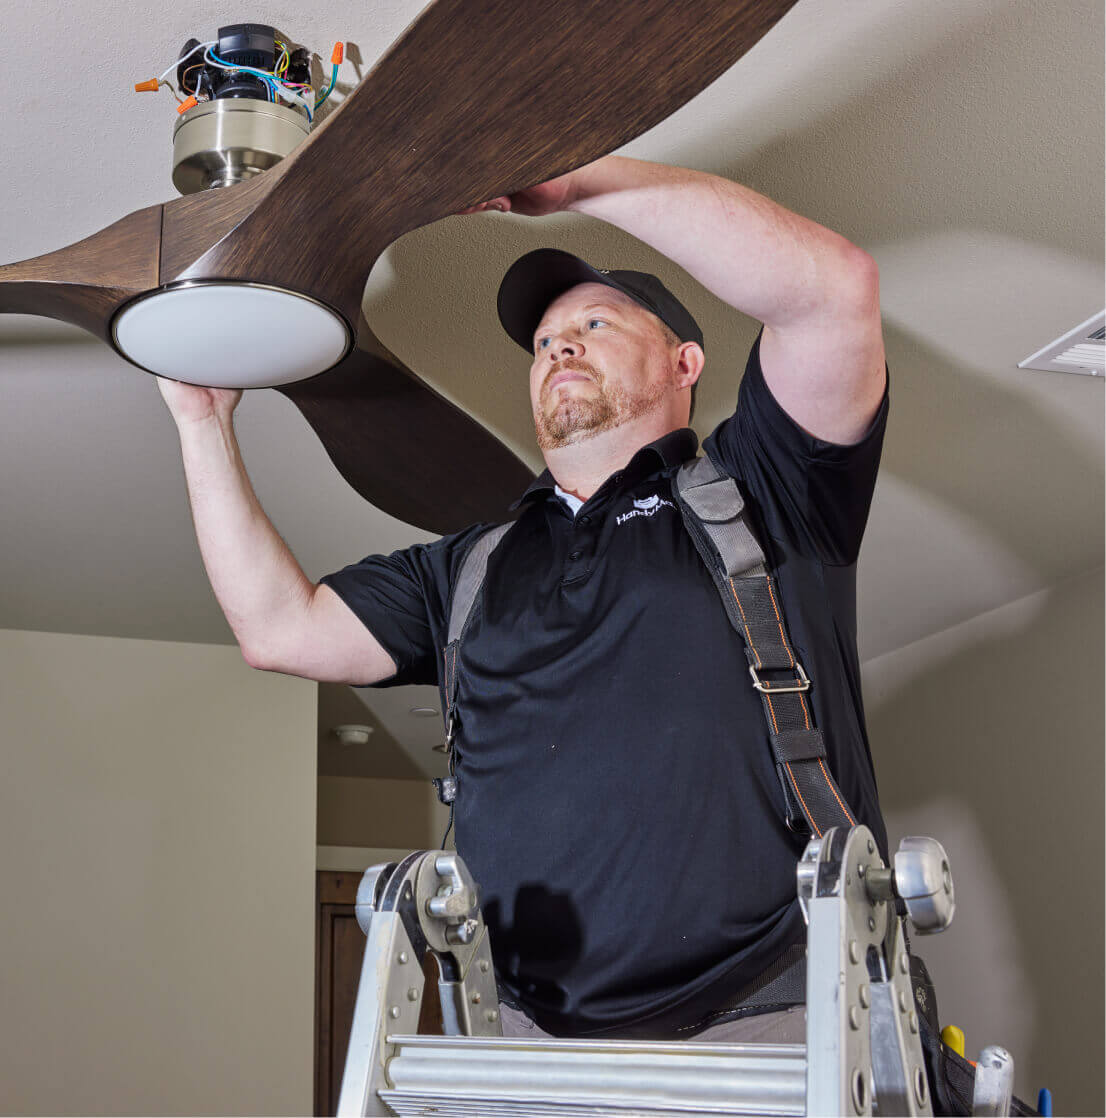 Connecticut handyman insurance that’s customized just for you